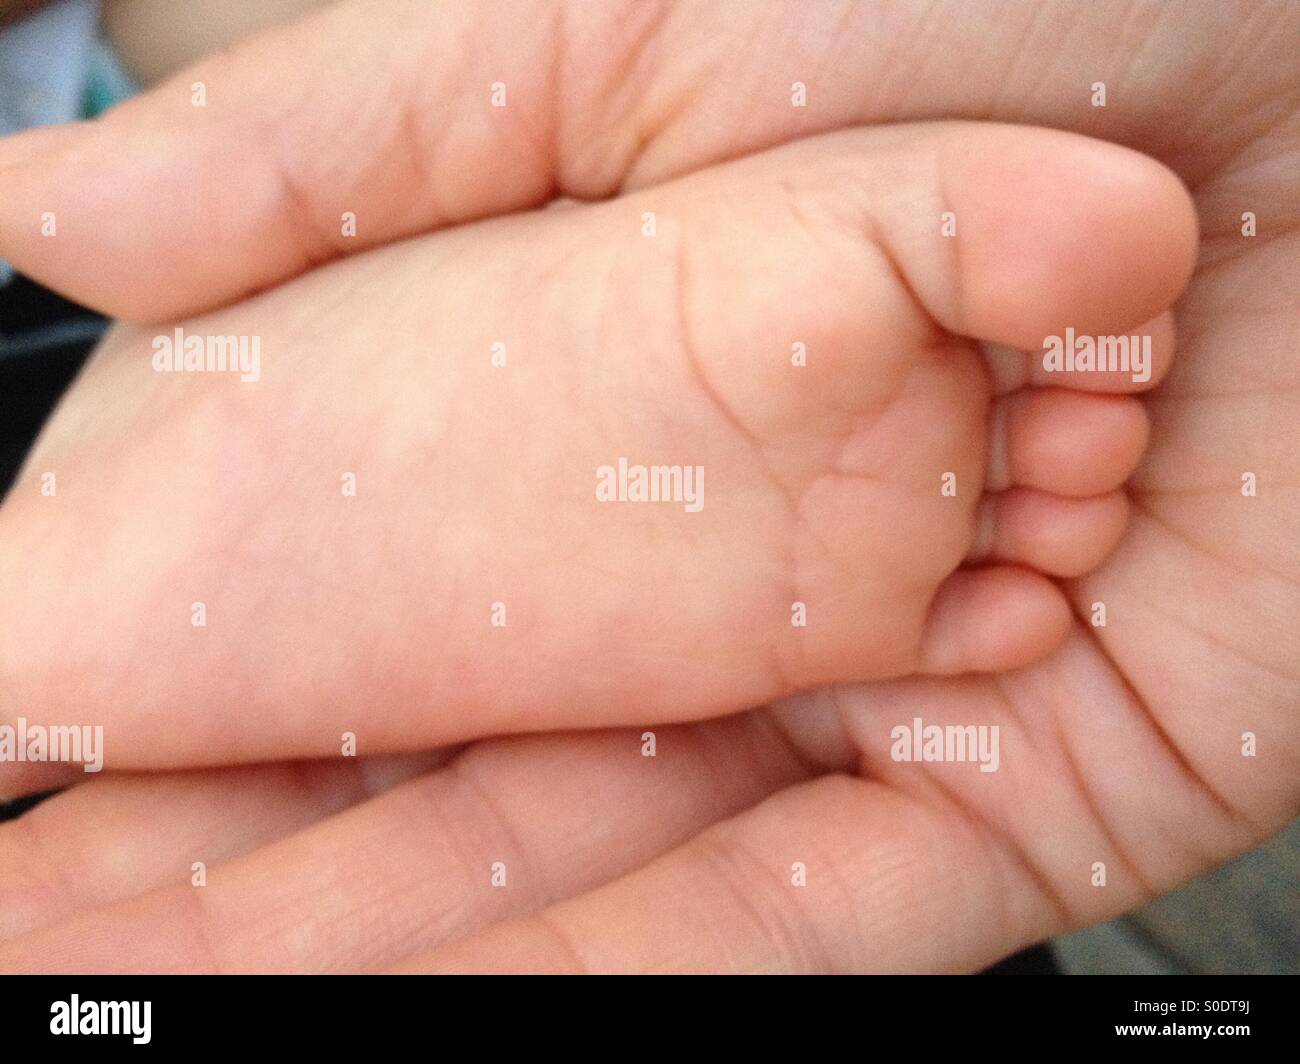 Child's foot in adult's hand Stock Photo